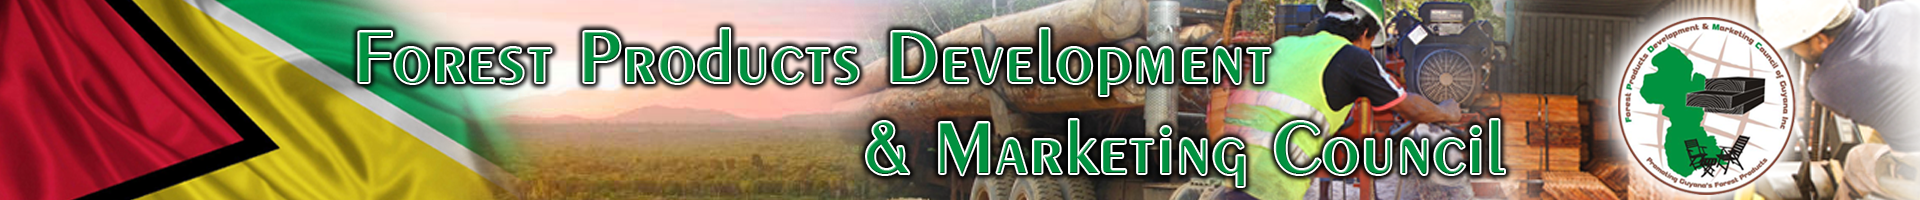 Forest Products Development & Marketing Council